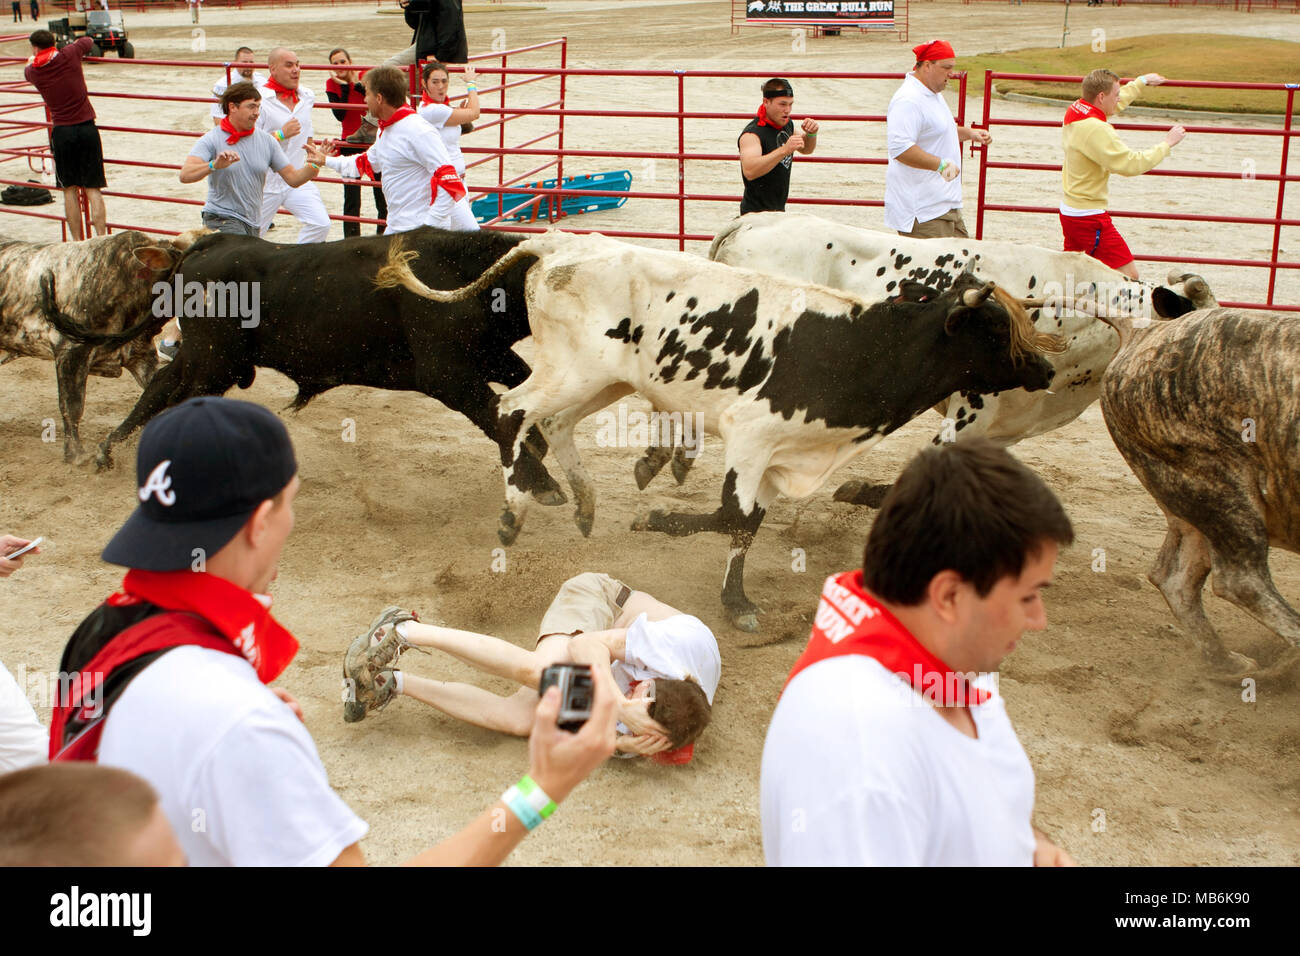 A man lies in the fetal position after being trampled while while running with the bulls at The Great Bull Run on October 19, 2013 in Conyers, GA. Stock Photo